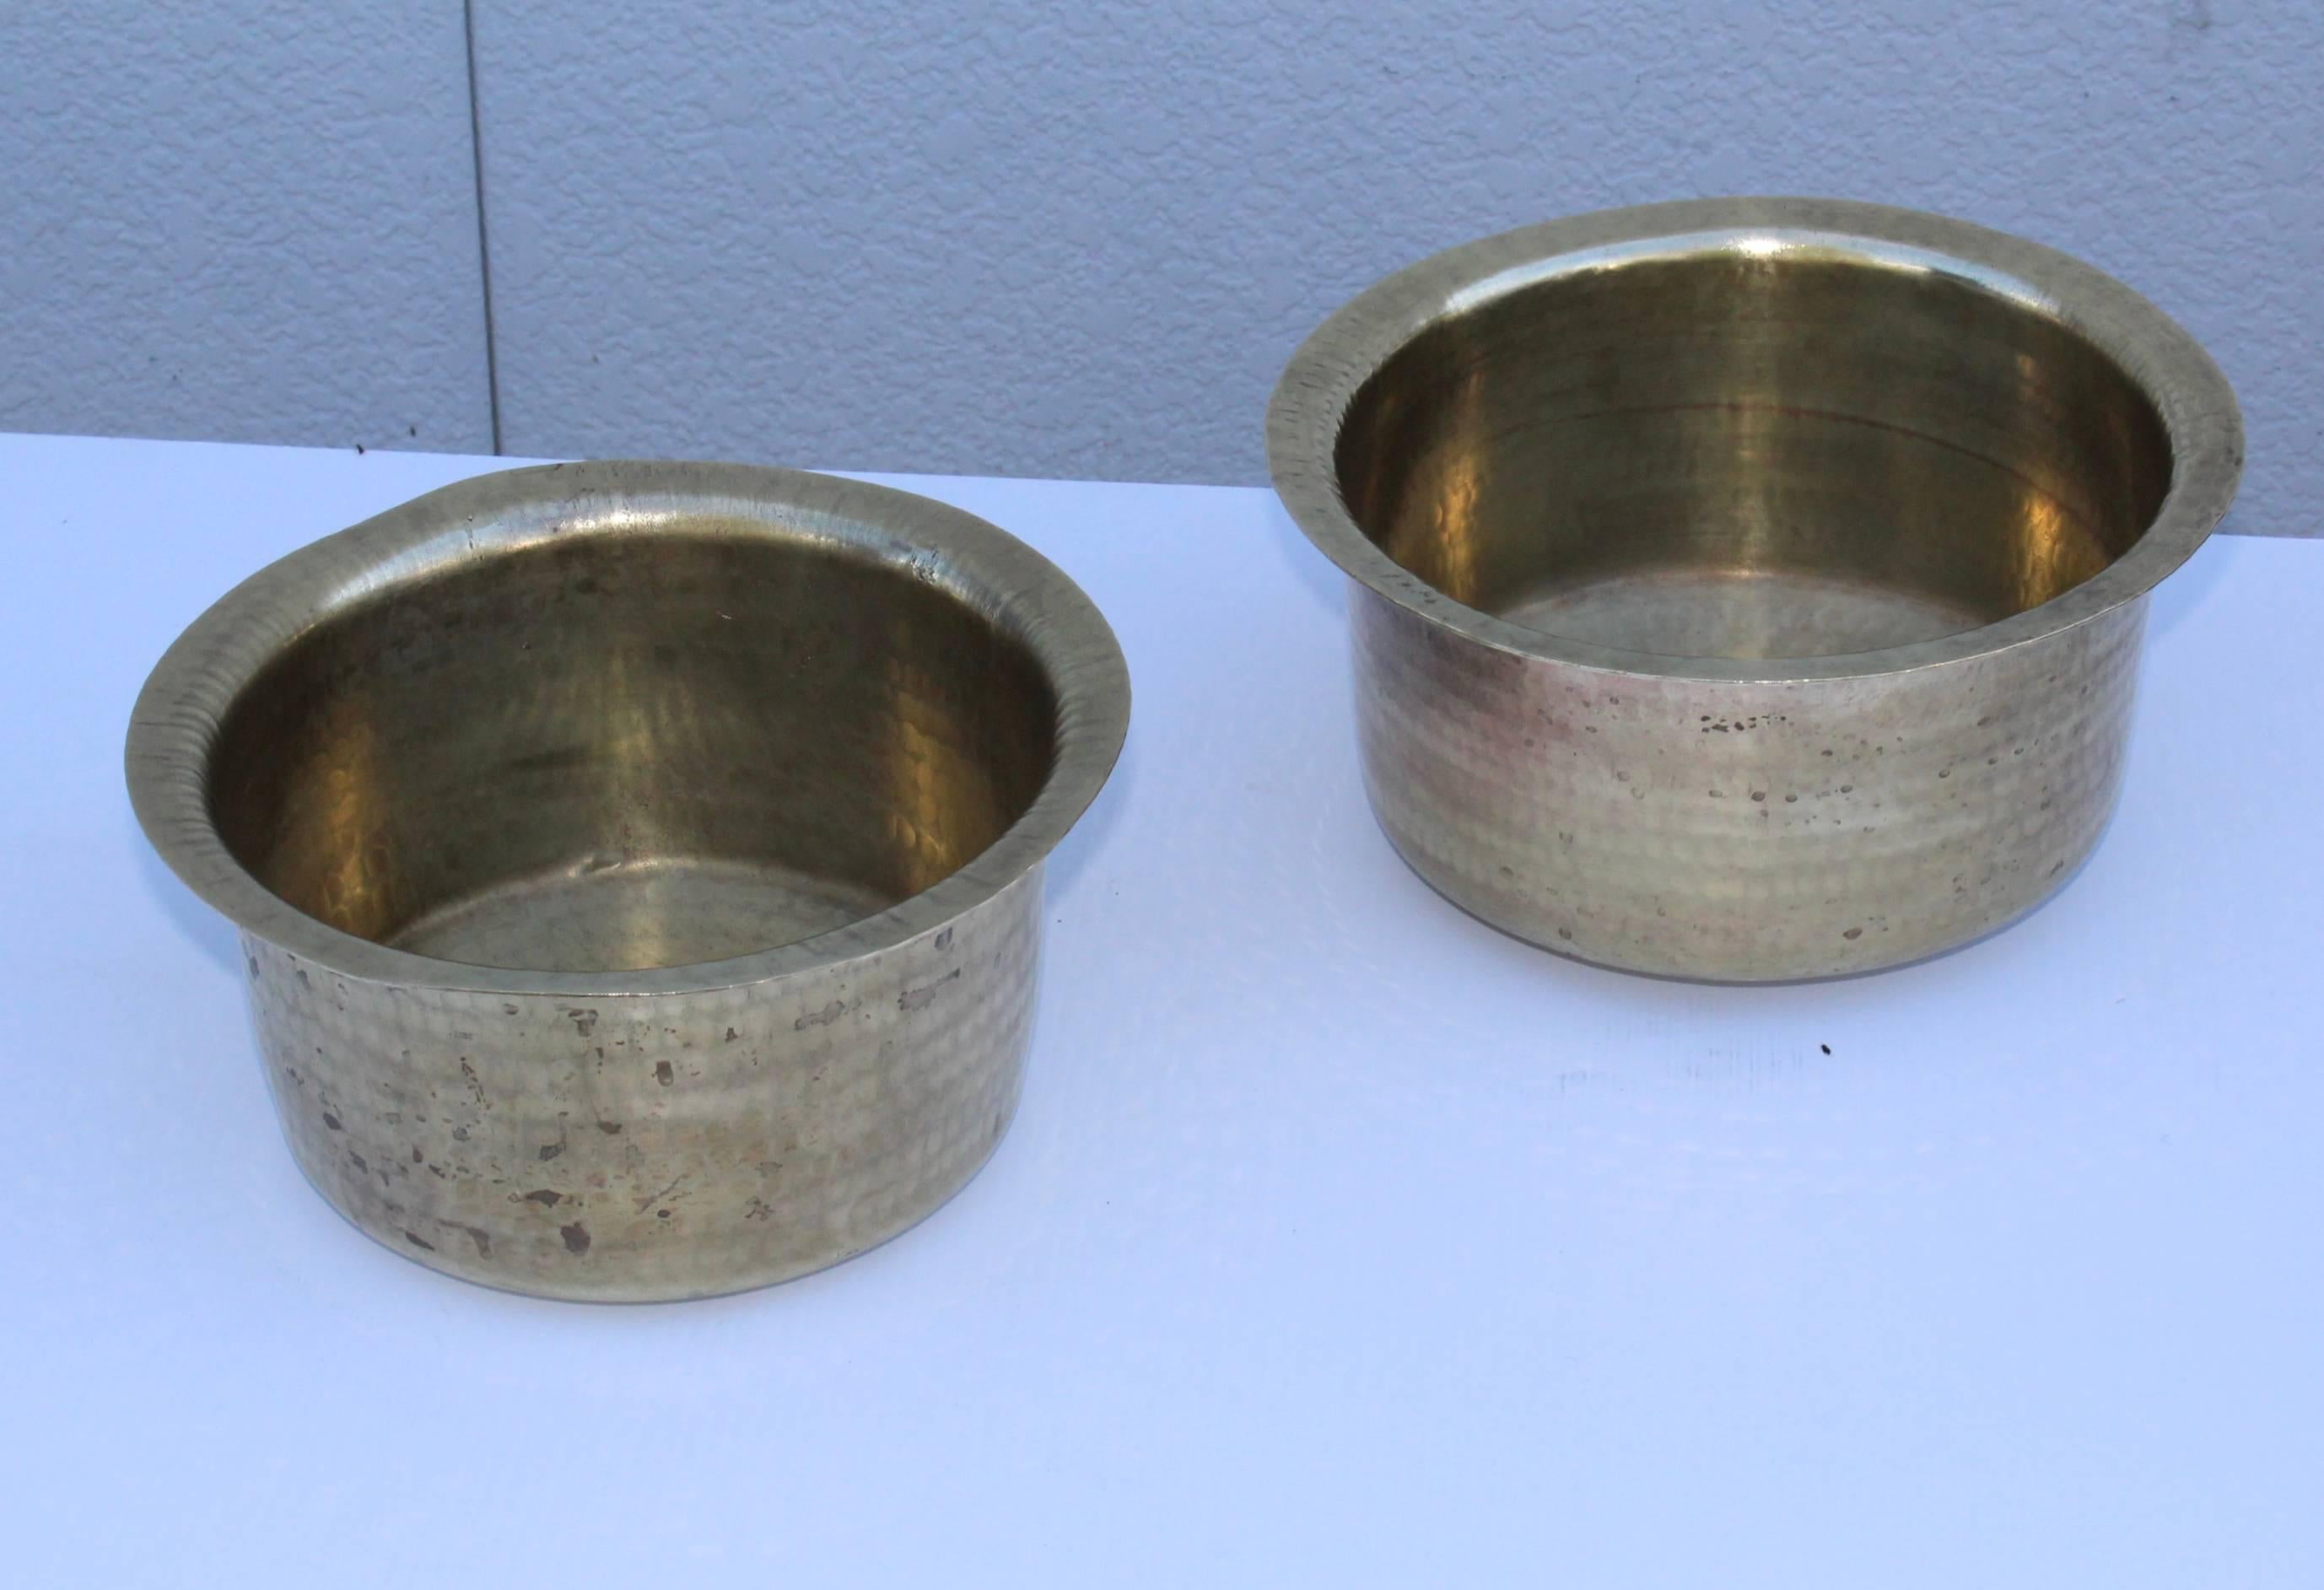 Stunning pair of nesting 1940s English brass hammered bowls.

Measures: Smaller bowl diameter 10.25'' height 5''.